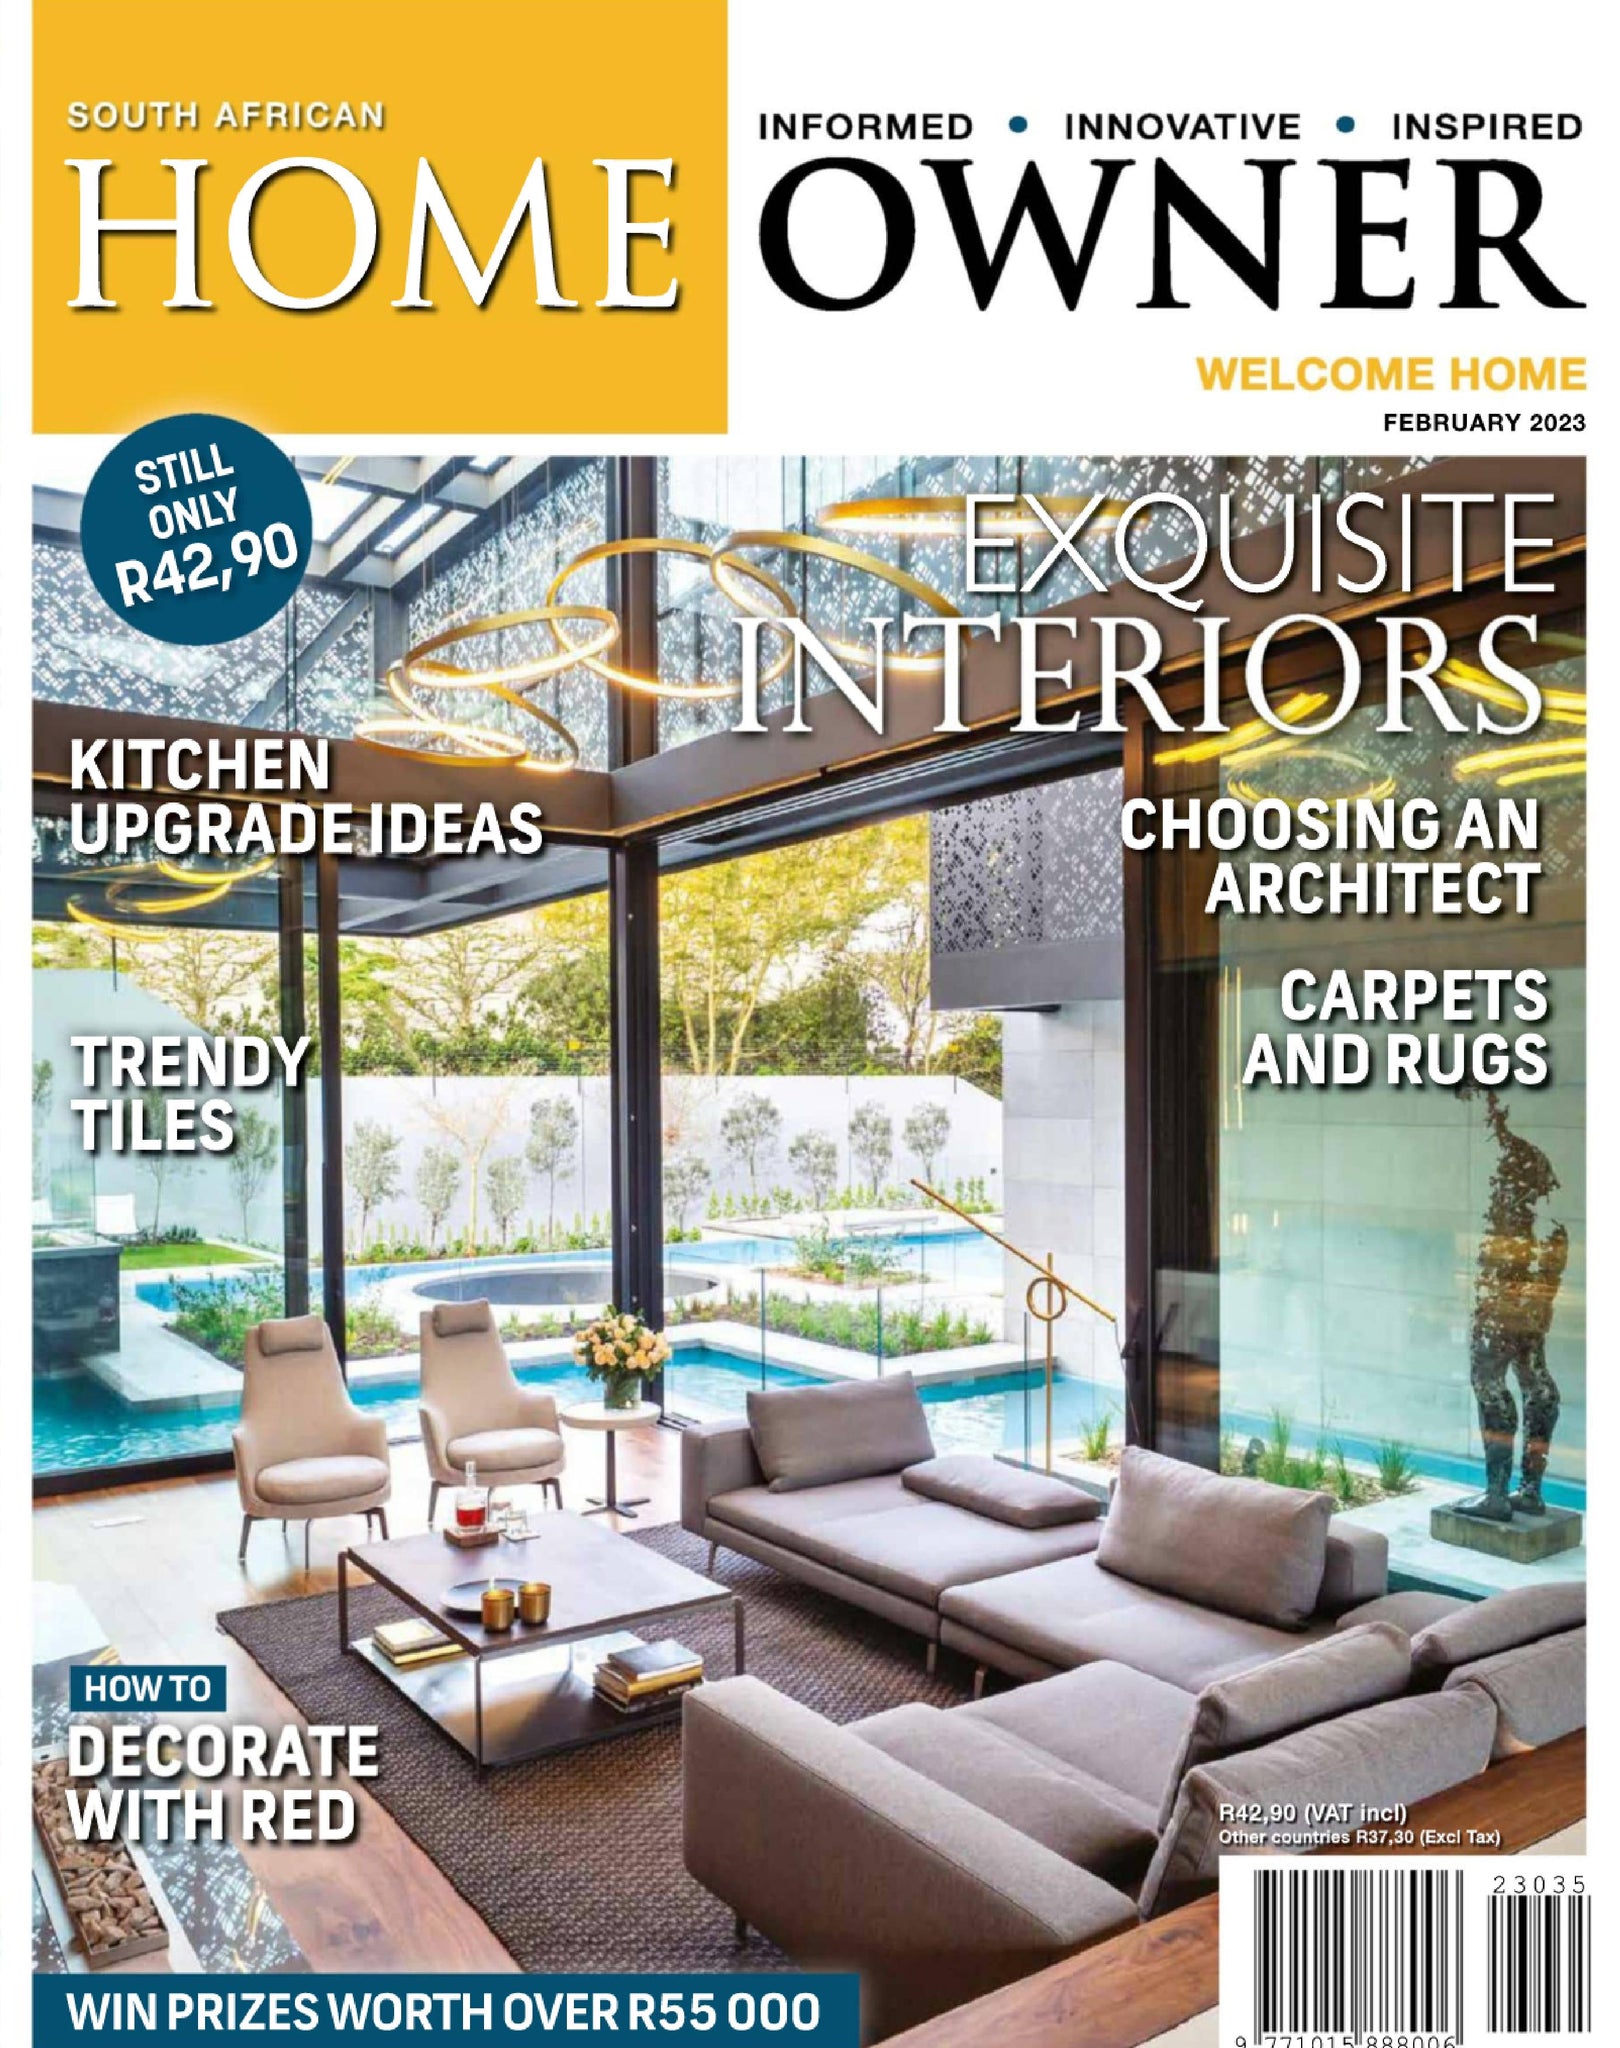 sa home owner magazine cover february 2023 issue